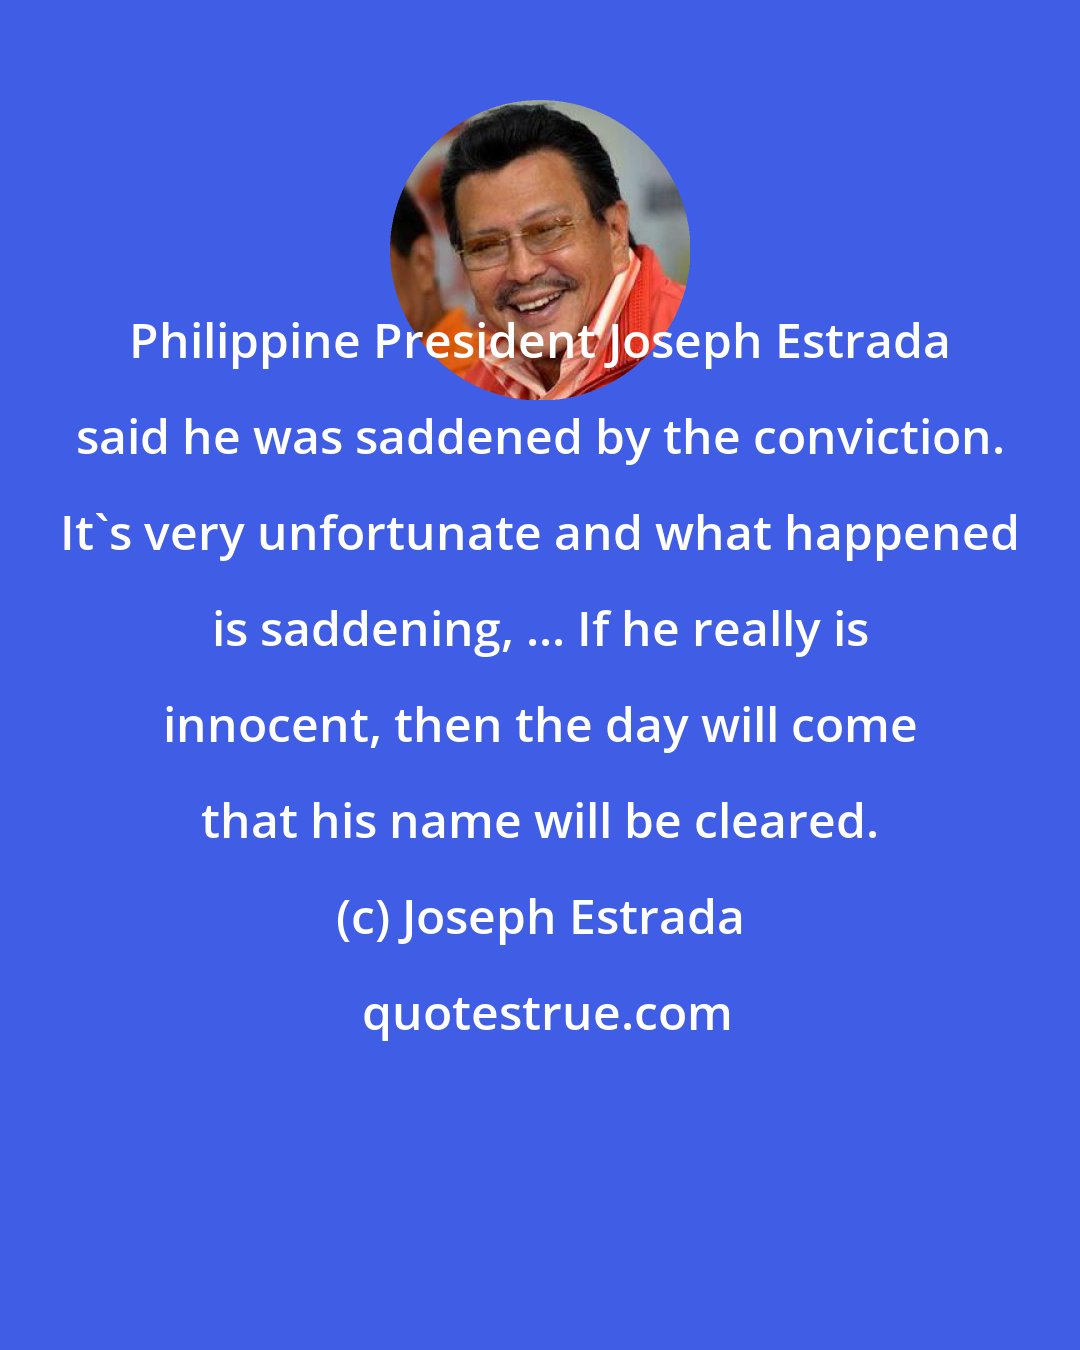 Joseph Estrada: Philippine President Joseph Estrada said he was saddened by the conviction. It's very unfortunate and what happened is saddening, ... If he really is innocent, then the day will come that his name will be cleared.